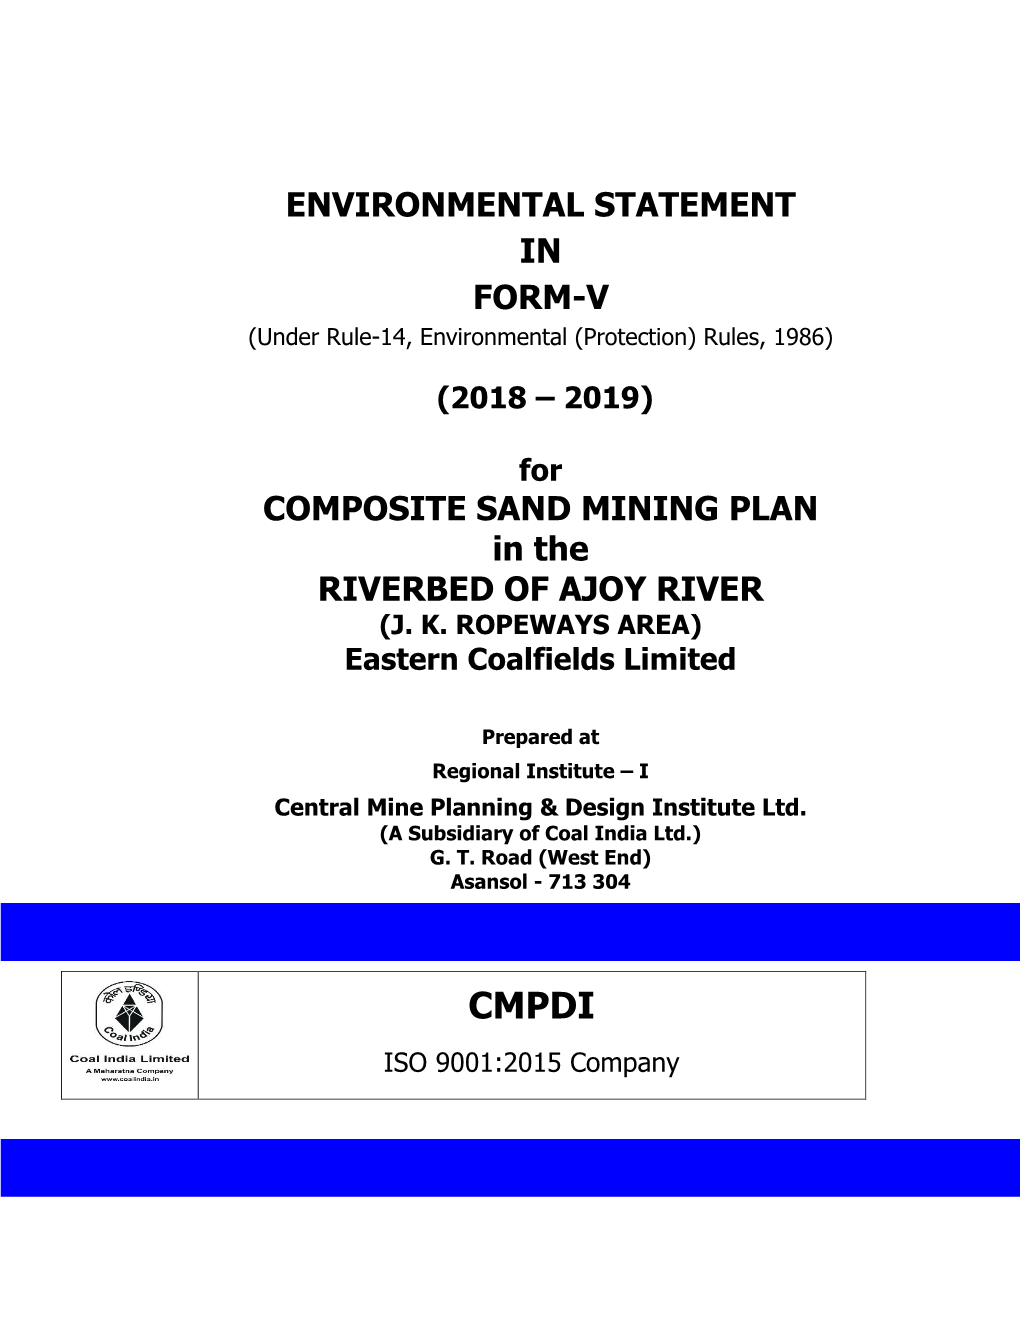 Environmental Statement in Form-V Composite Sand